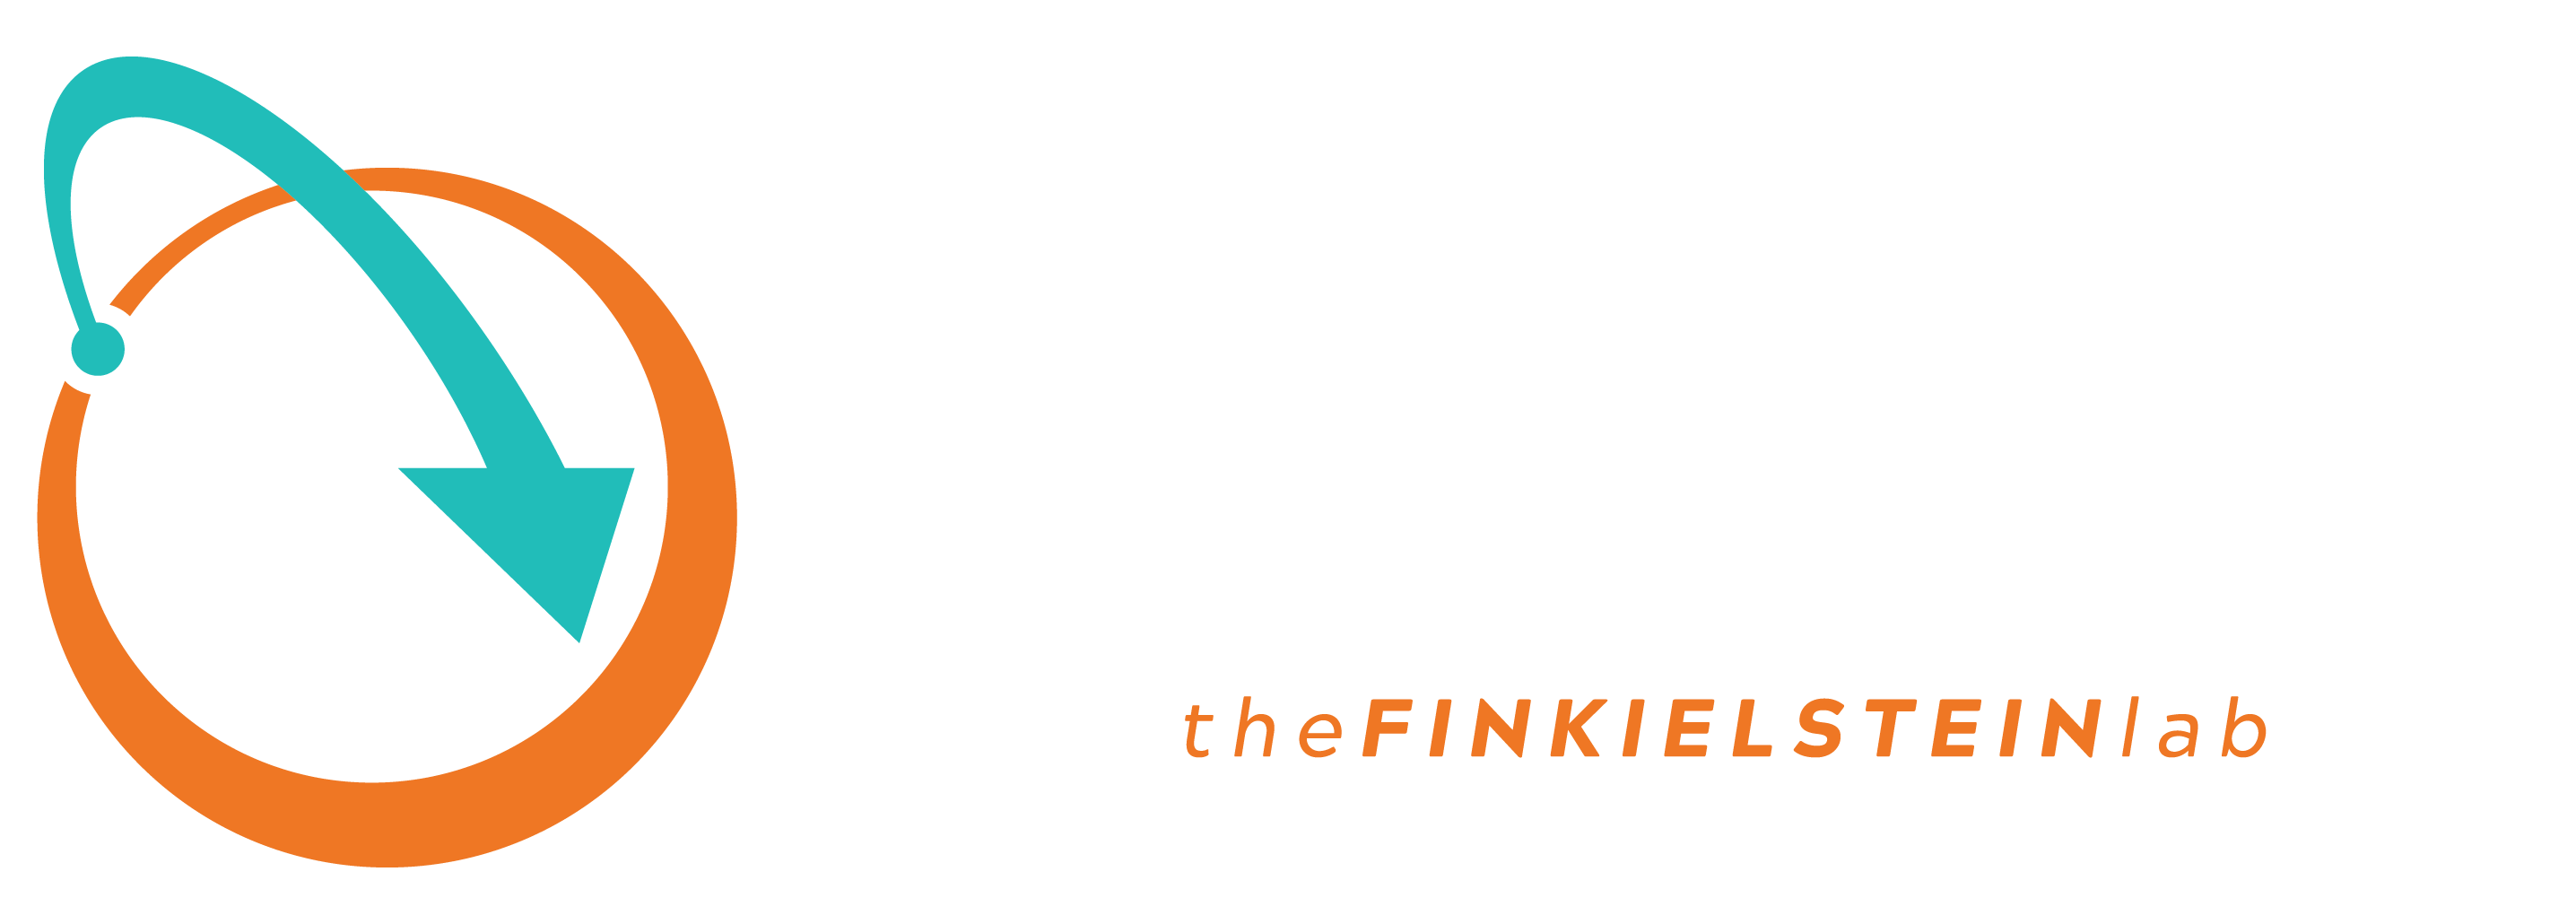 Integrated Cellular Responses Laboratory | The Finkielstein Lab Logo with white text